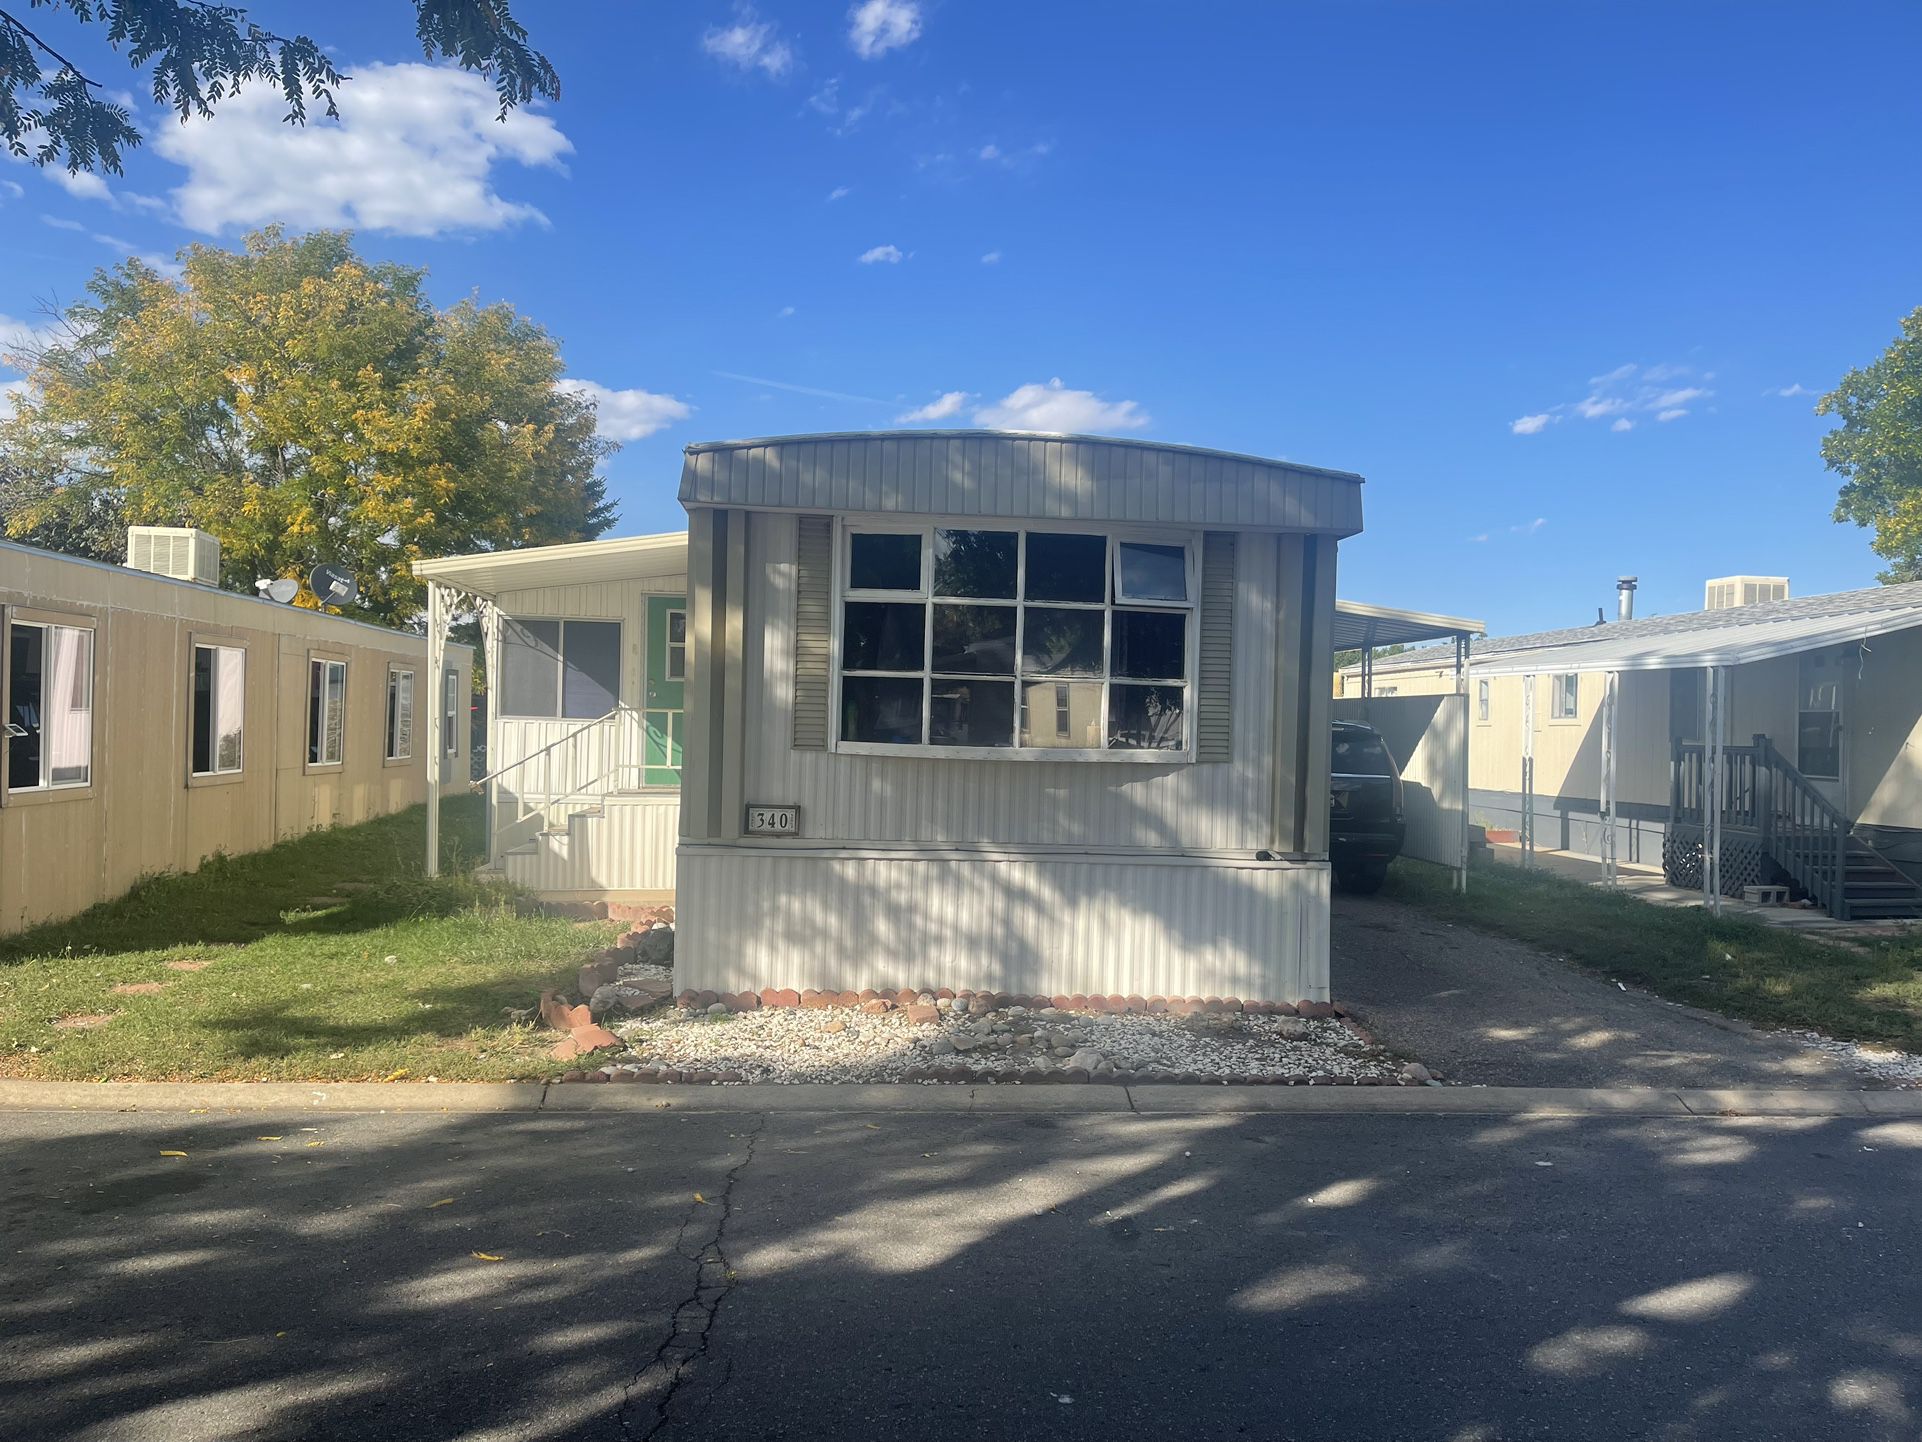 Mobile Home For Sale 